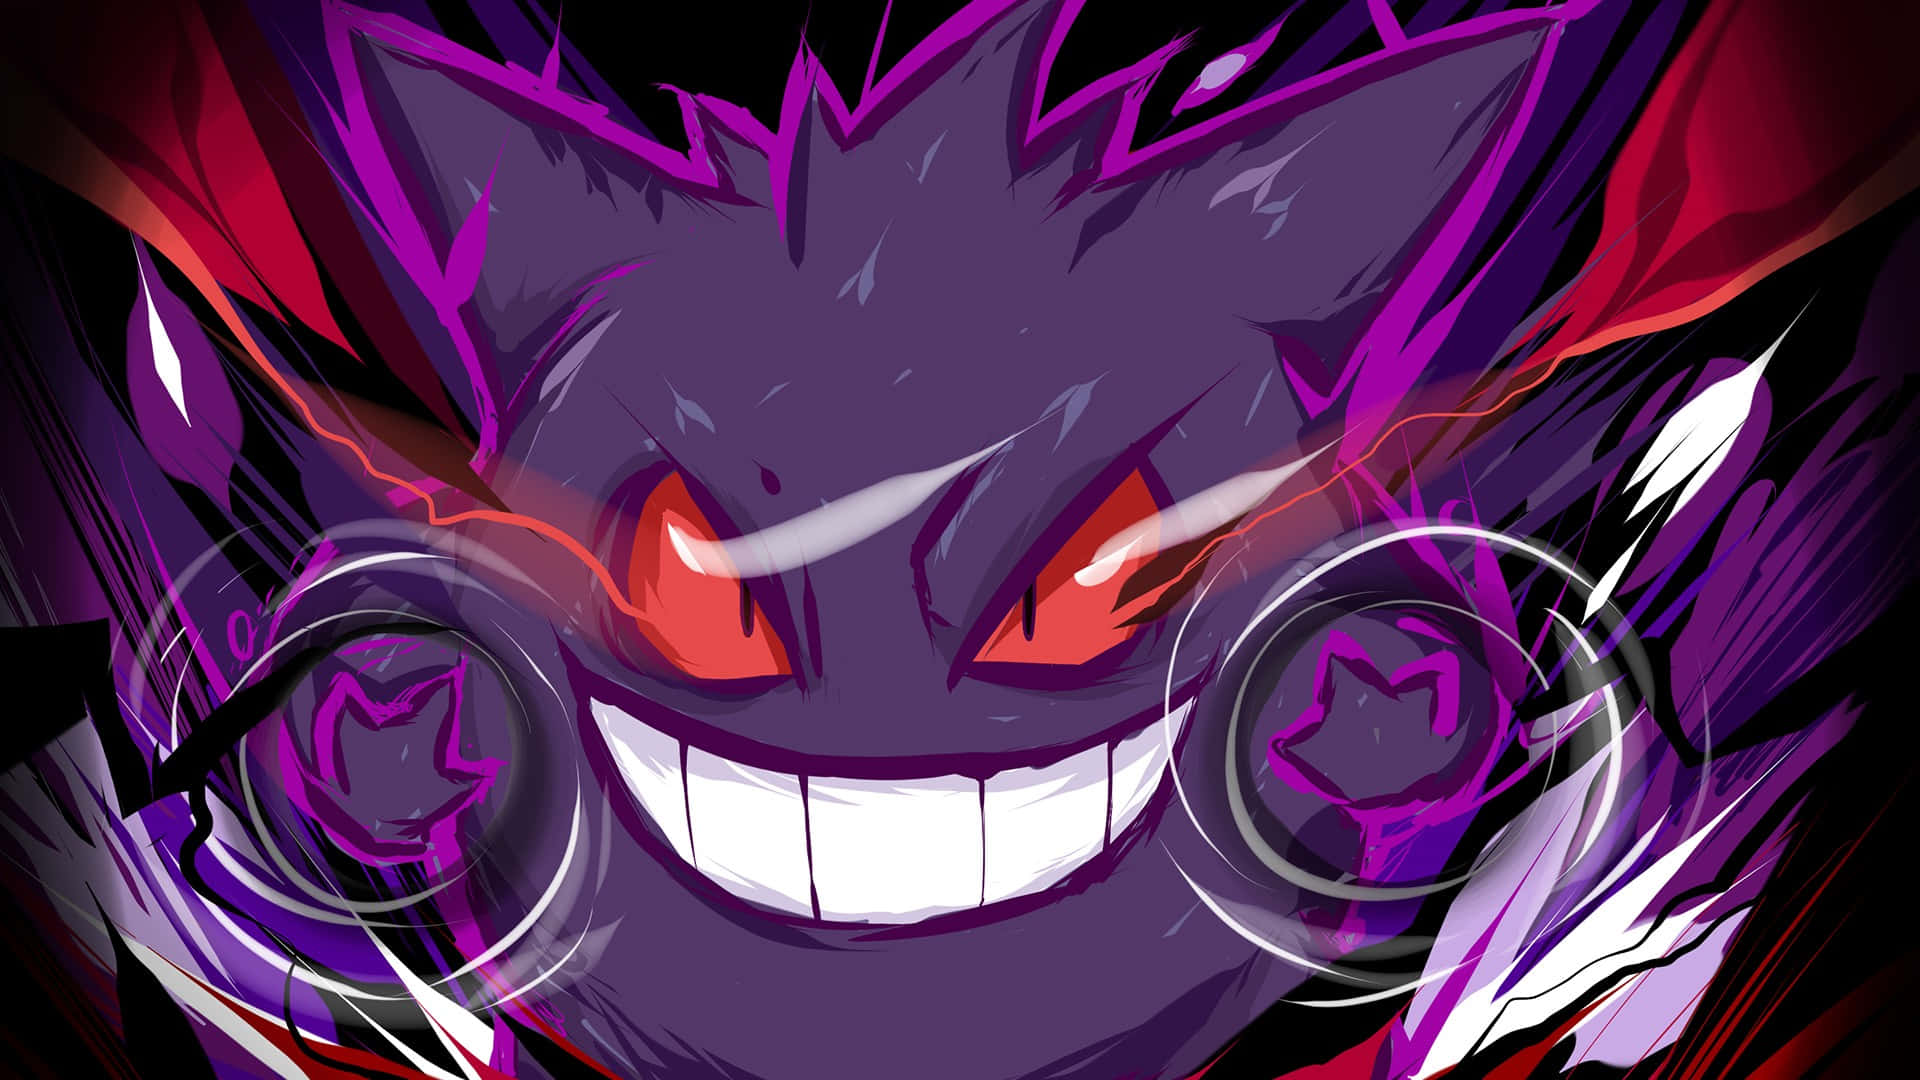 Cast a spell with the ghost pokemon, Gengar!